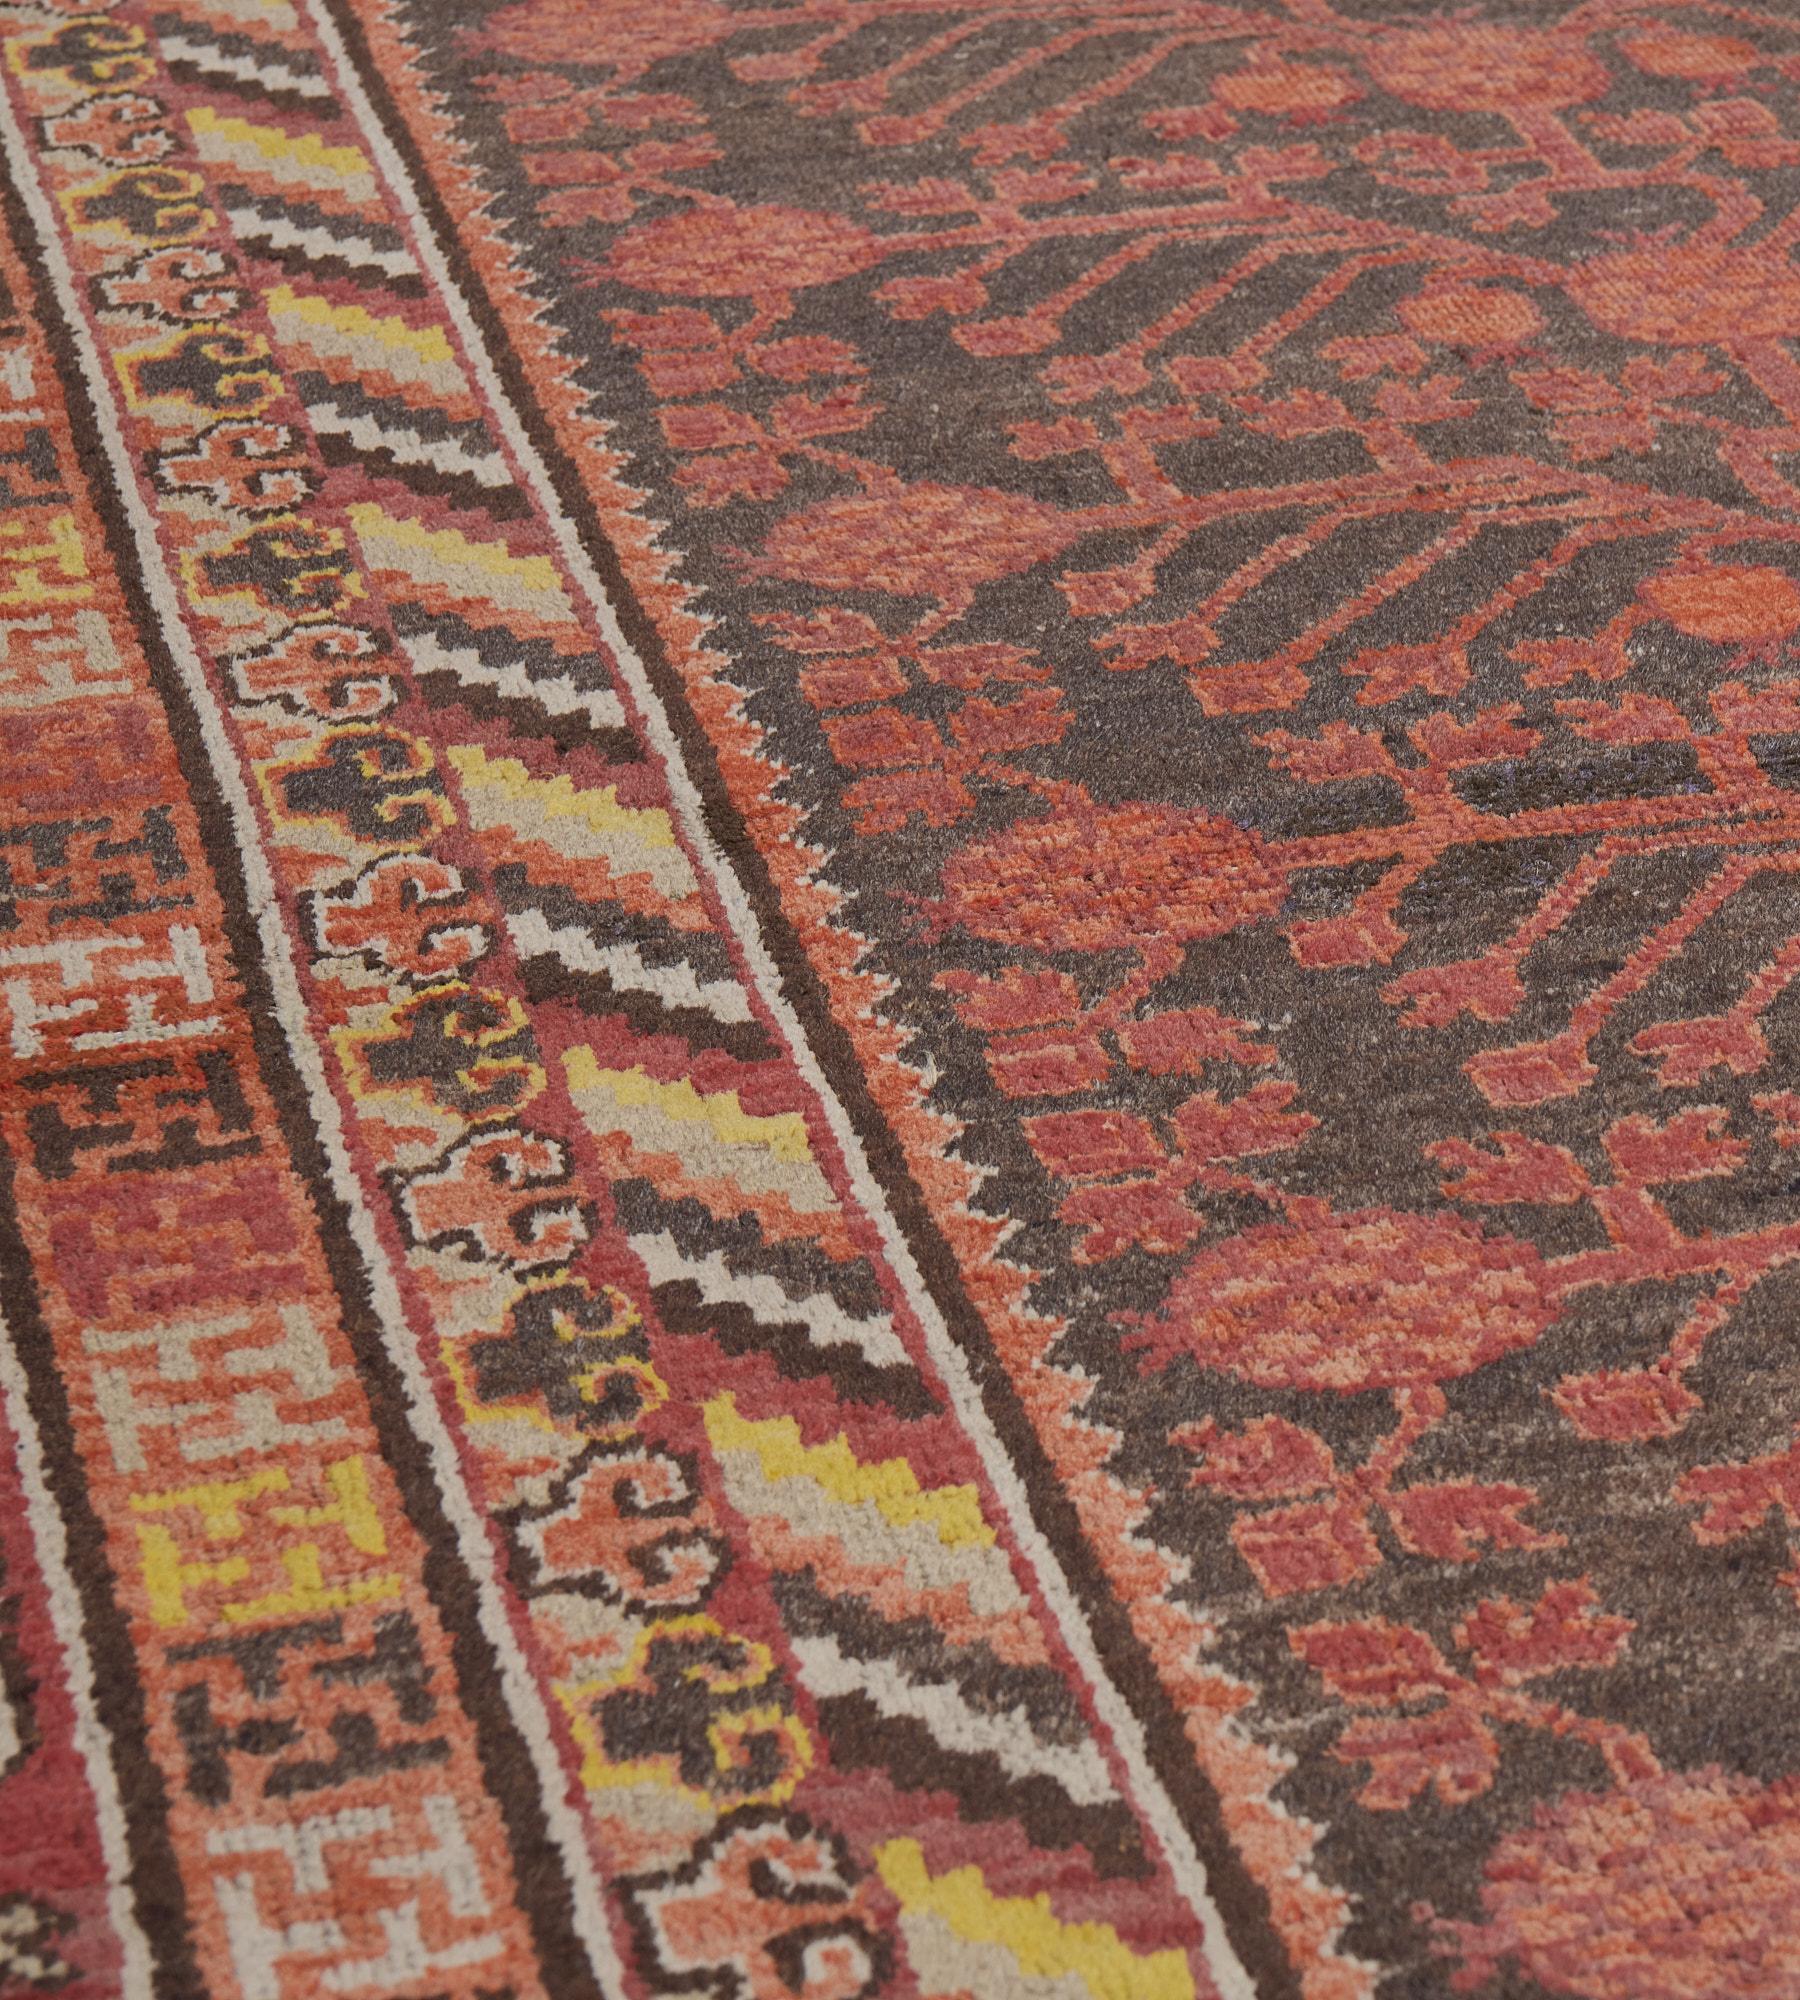 Antique Hand-Knotted Red Pomegranate Khotan Rug In Good Condition For Sale In West Hollywood, CA